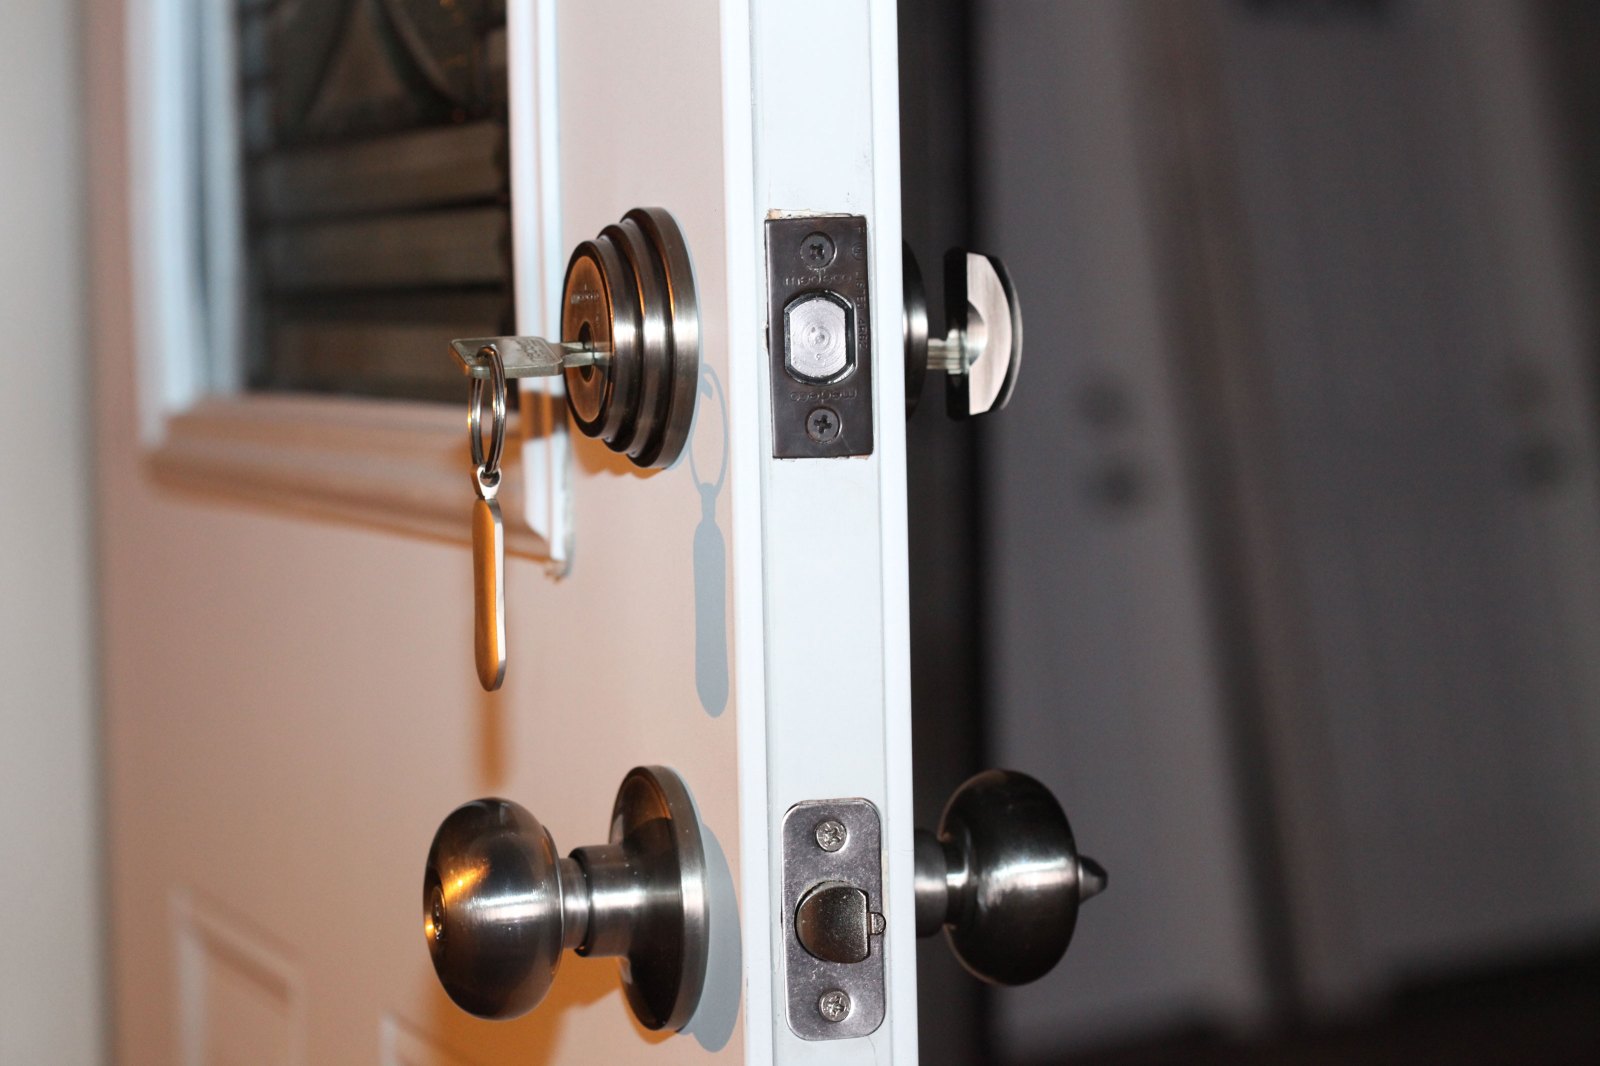 Are Electronic Door Locks Safe? Best Locks for Home